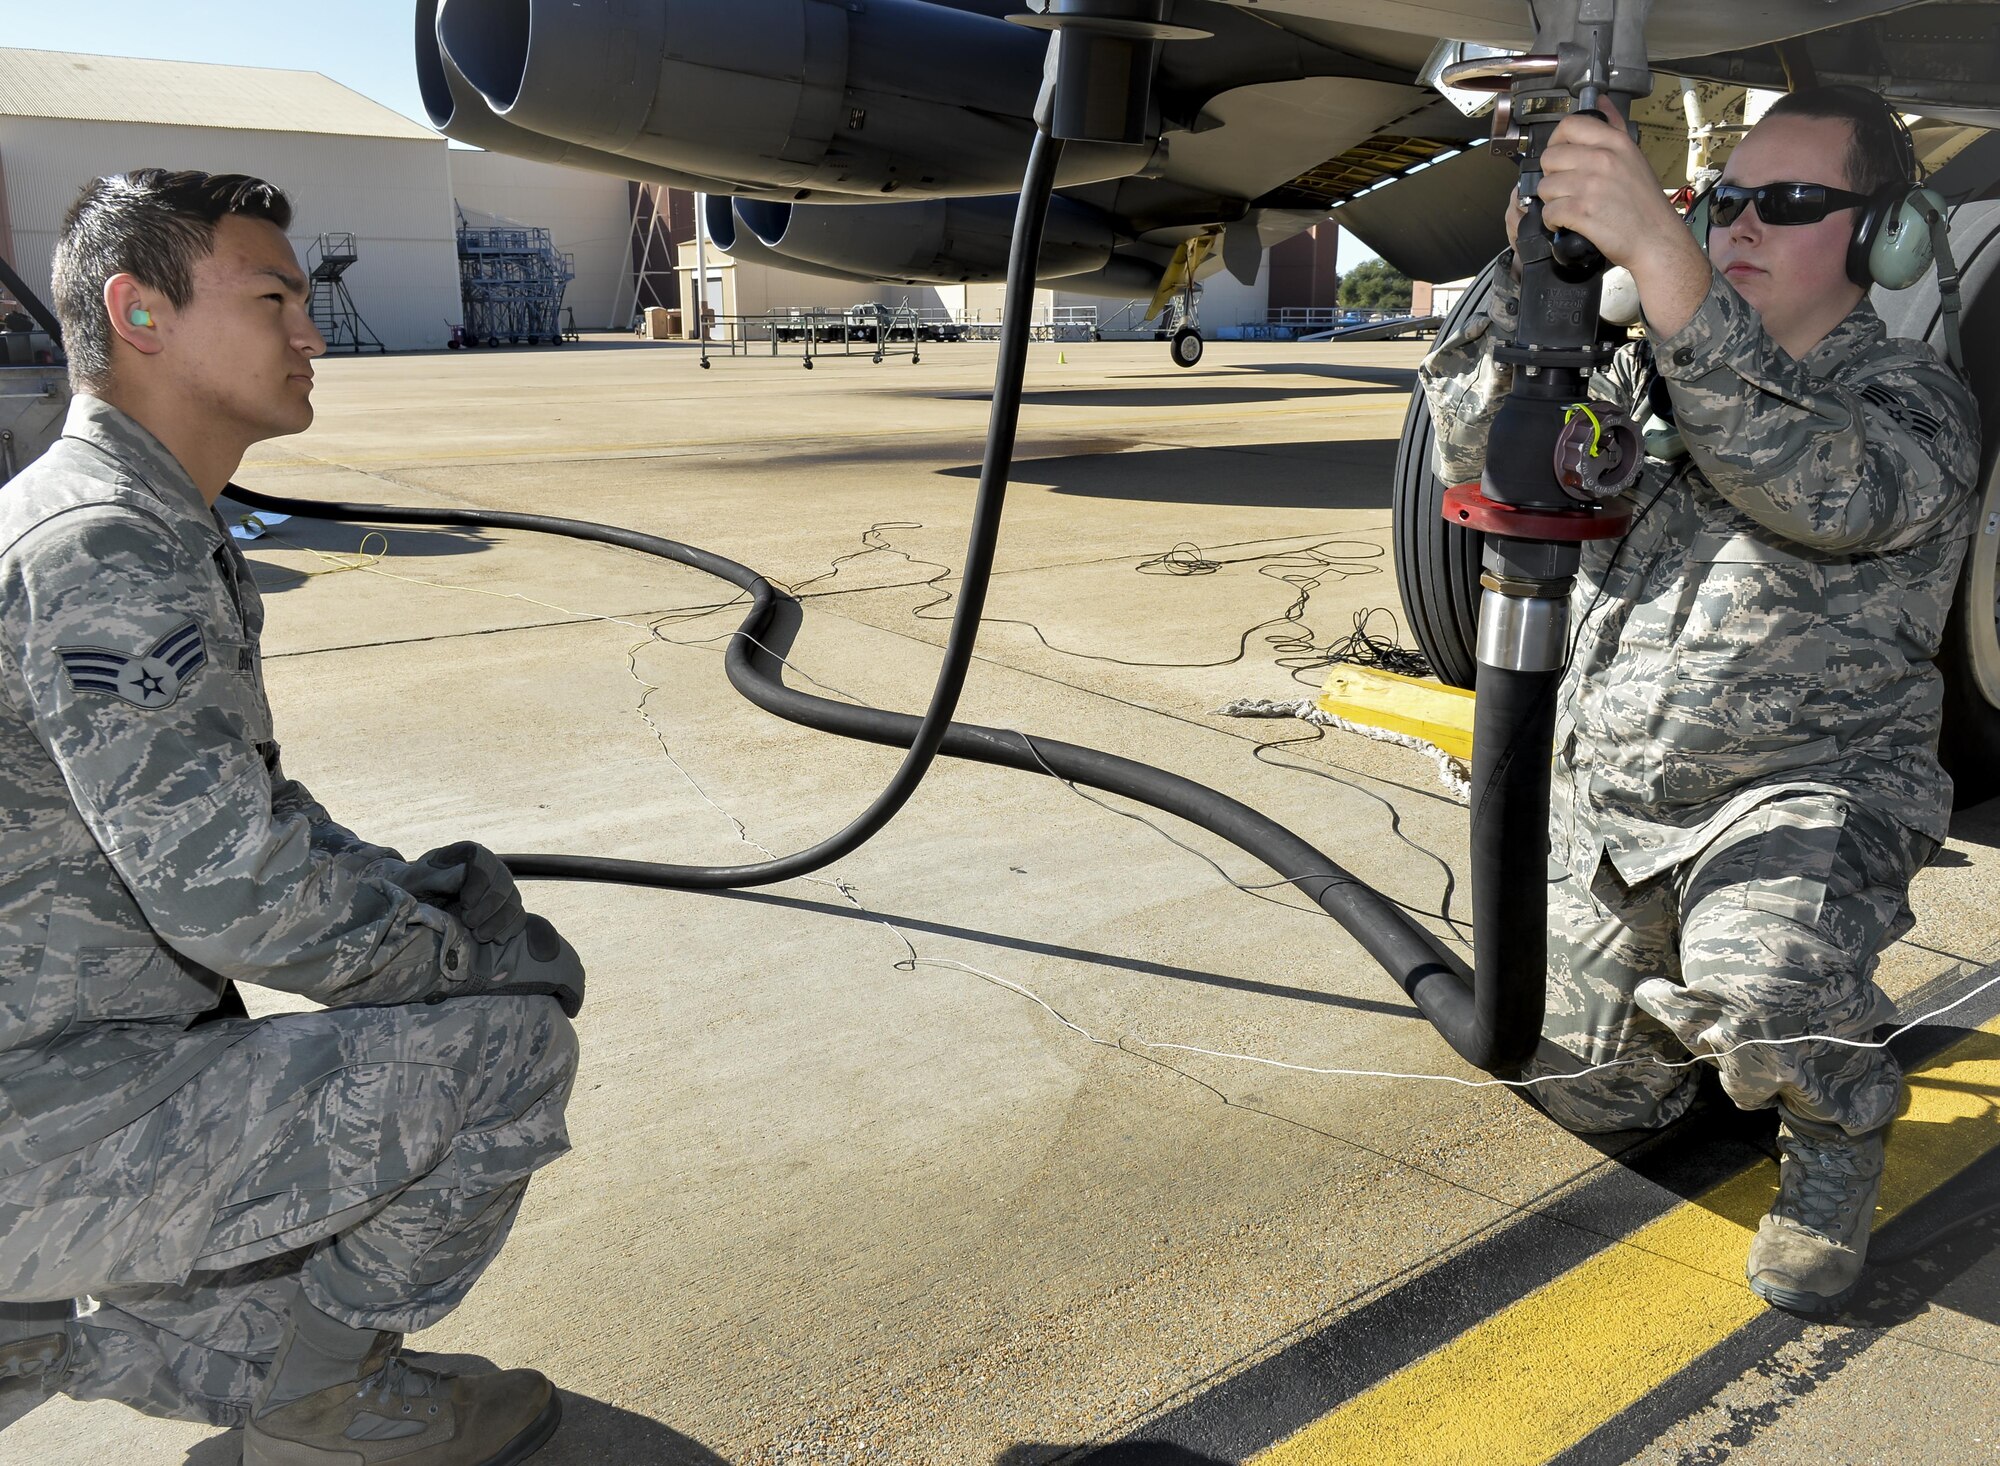 Senior Airman William Burford, 2nd Logistics Readiness Squadron fuel distribution operator, monitors Senior Airman Michael Breiter, 2nd Maintenance Squadron crew chief, as he attaches a fuel nozzle to a B-52 Stratofortress at Barksdale Air Force Base, La., Jan. 12, 2016. The B-52 can hold about 100,000 to 200,000 pounds of fuel per sortie, taking one to two hours to fill the tanks. (U.S. Air Force photo/Airman 1st Class Mozer O. Da Cunha)